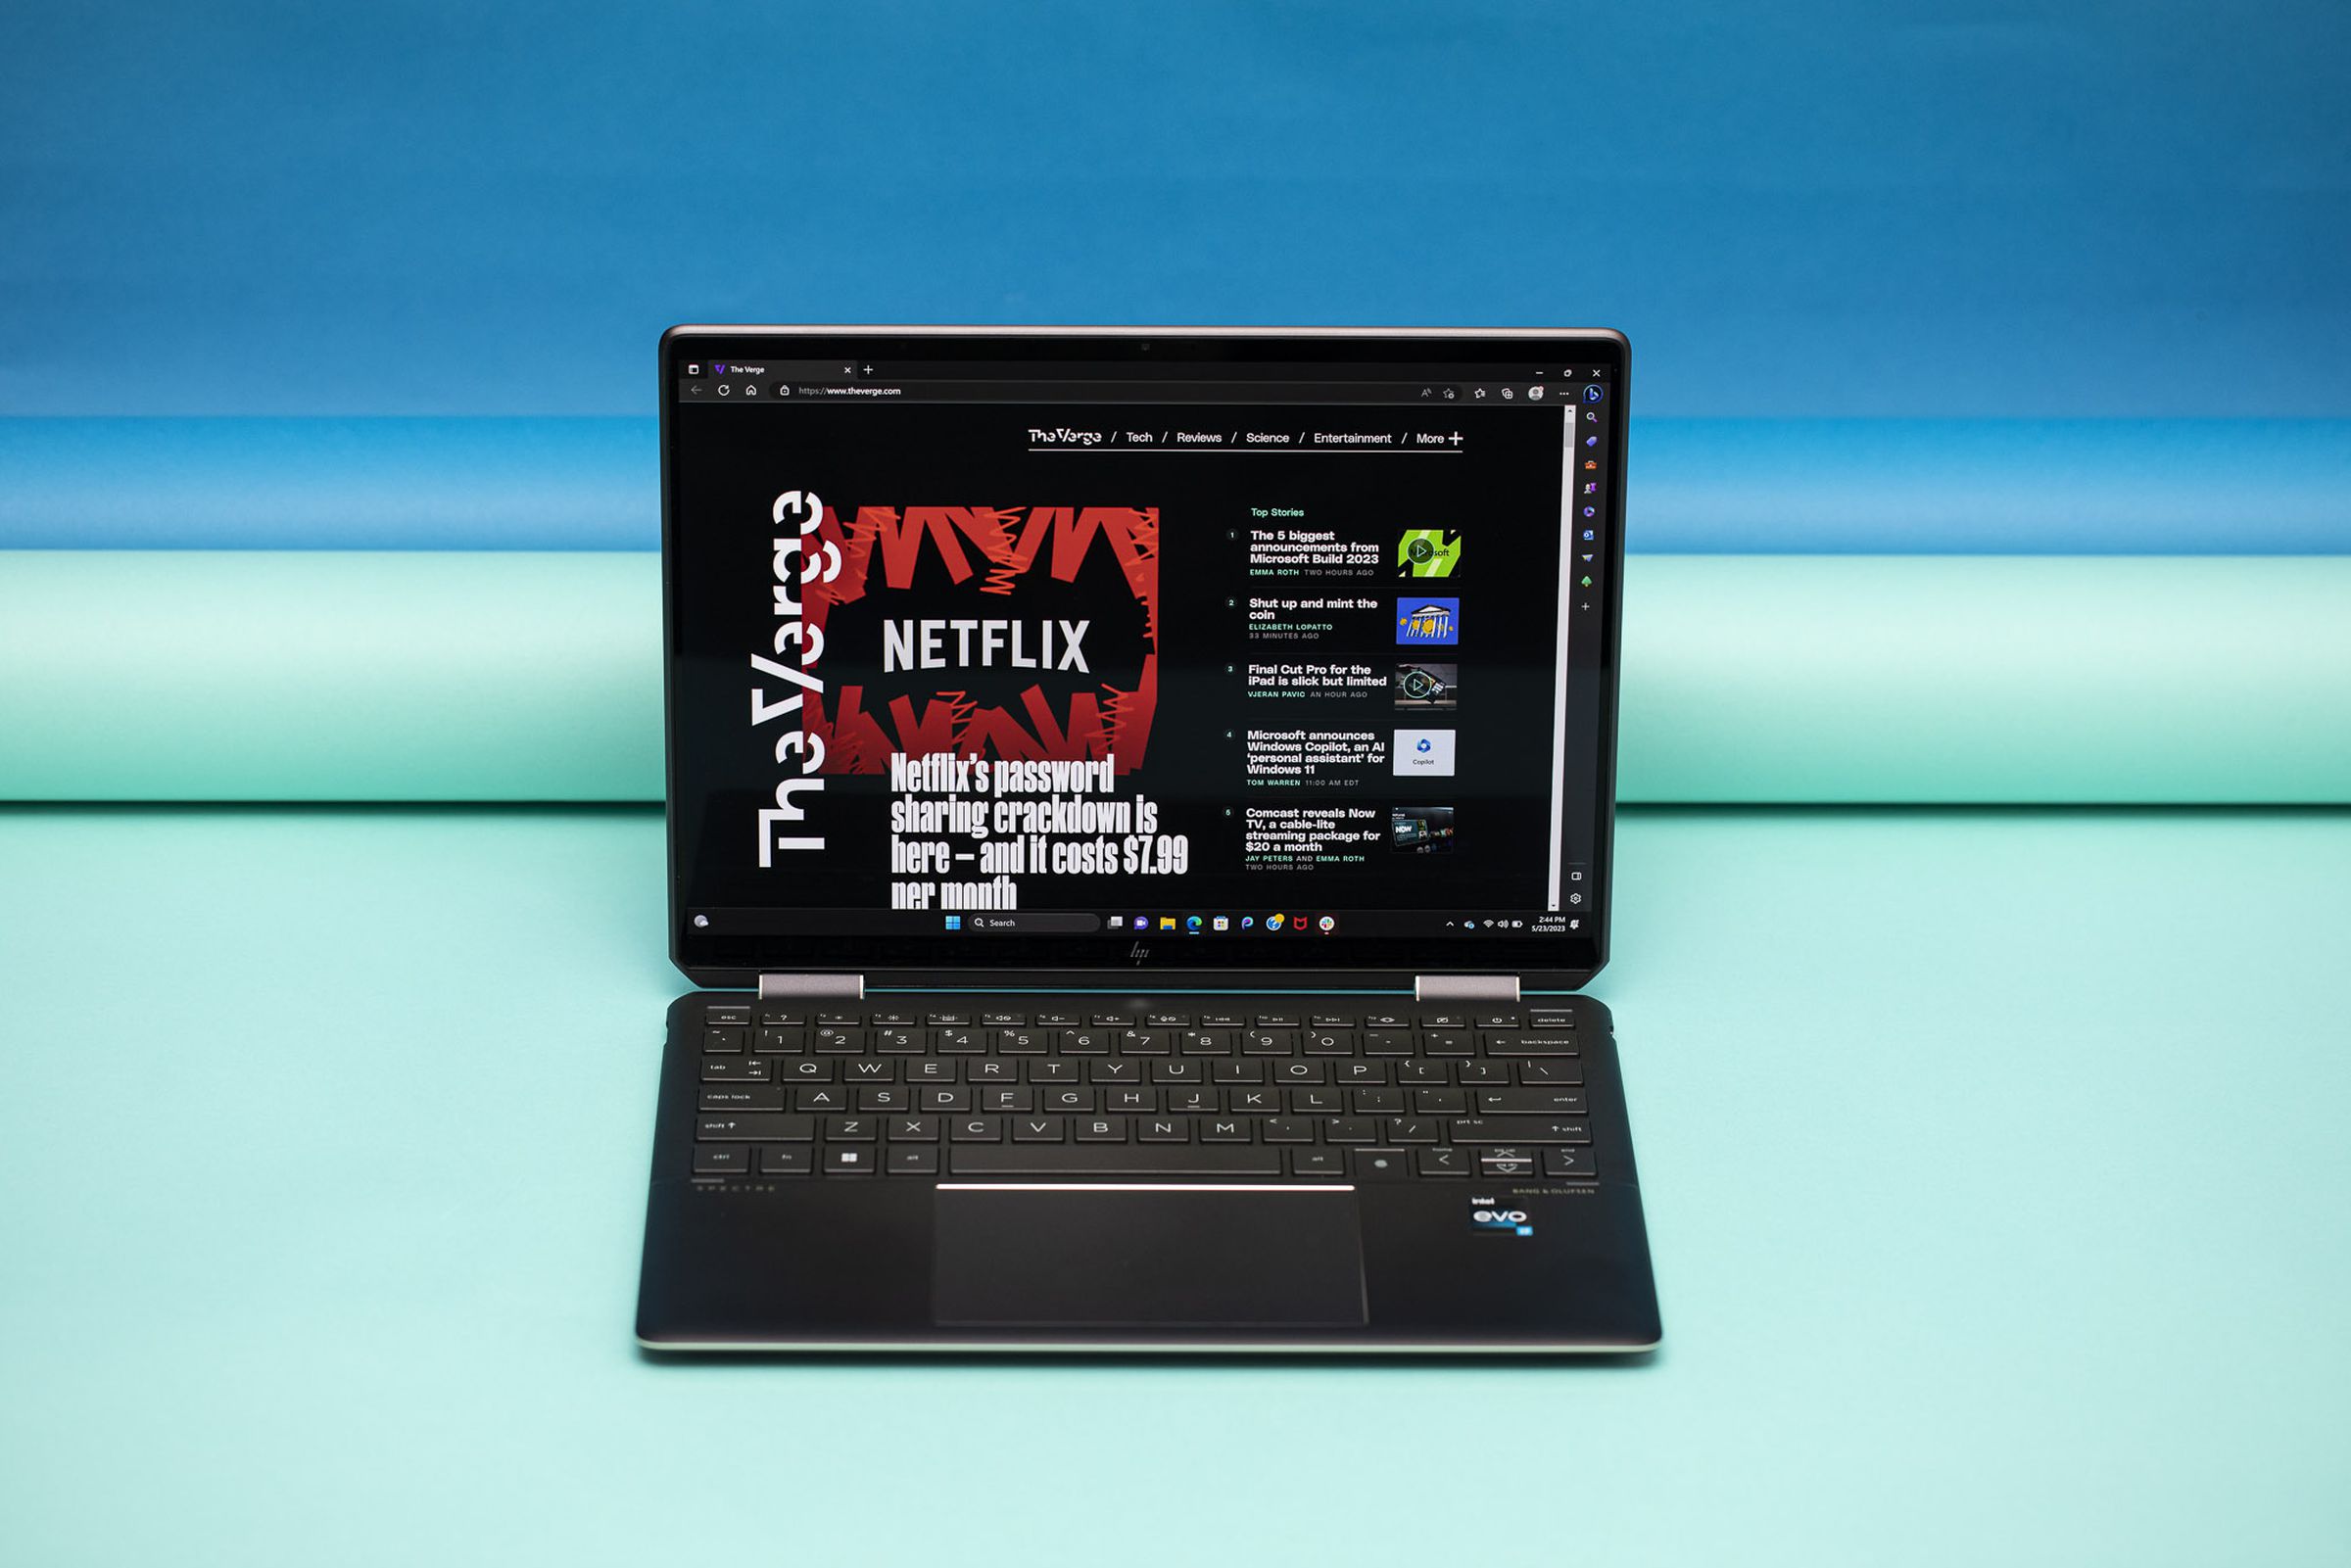 The HP Spectre x360 13.5 displaying The Verge homepage seen from above.